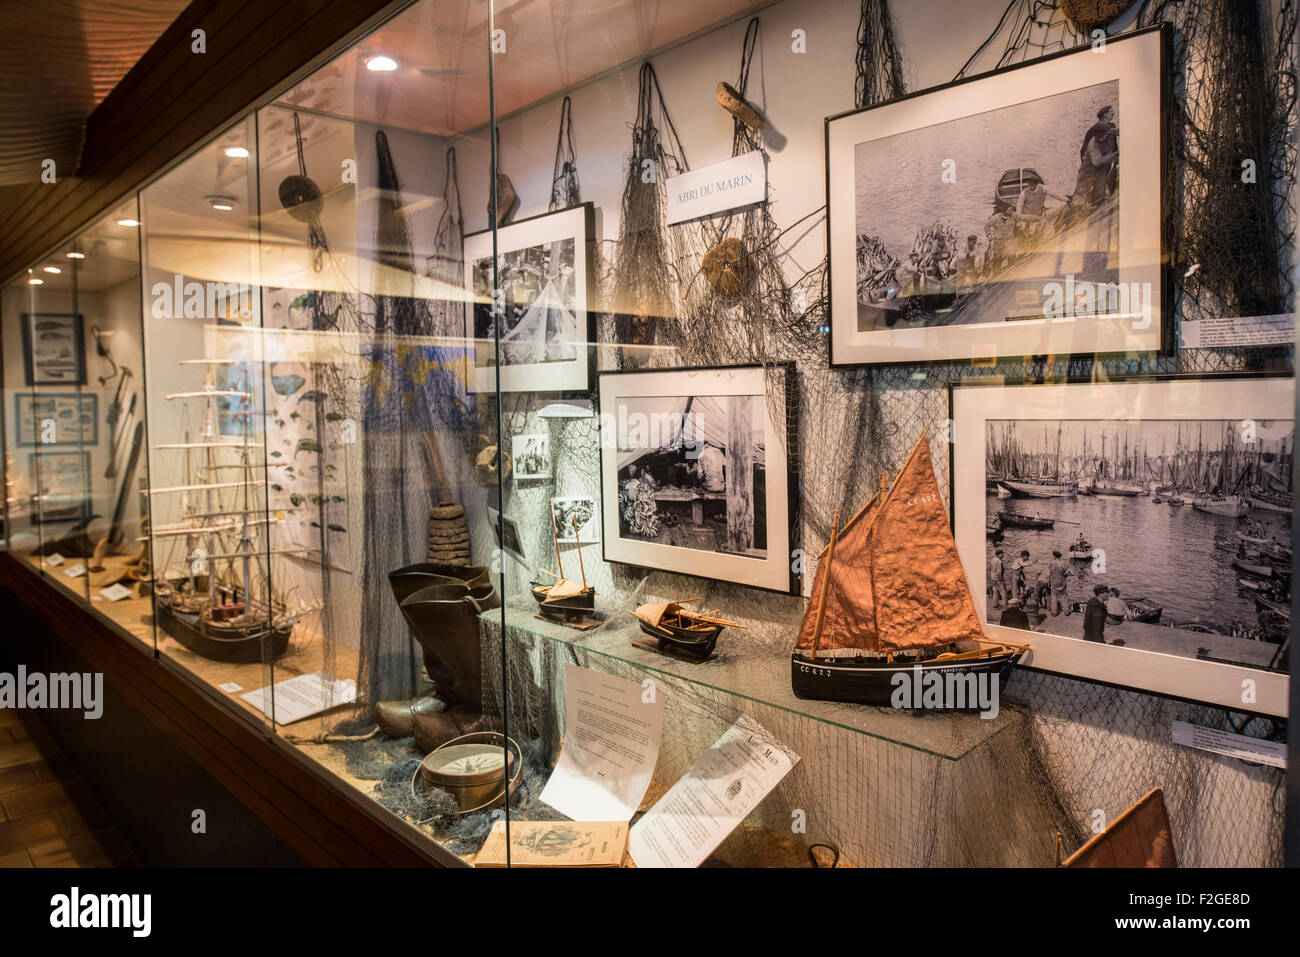 Interior of the Musée de la Pêche / fishing museum in the Ville Close at Concarneau, Finistère, Brittany, France Stock Photo